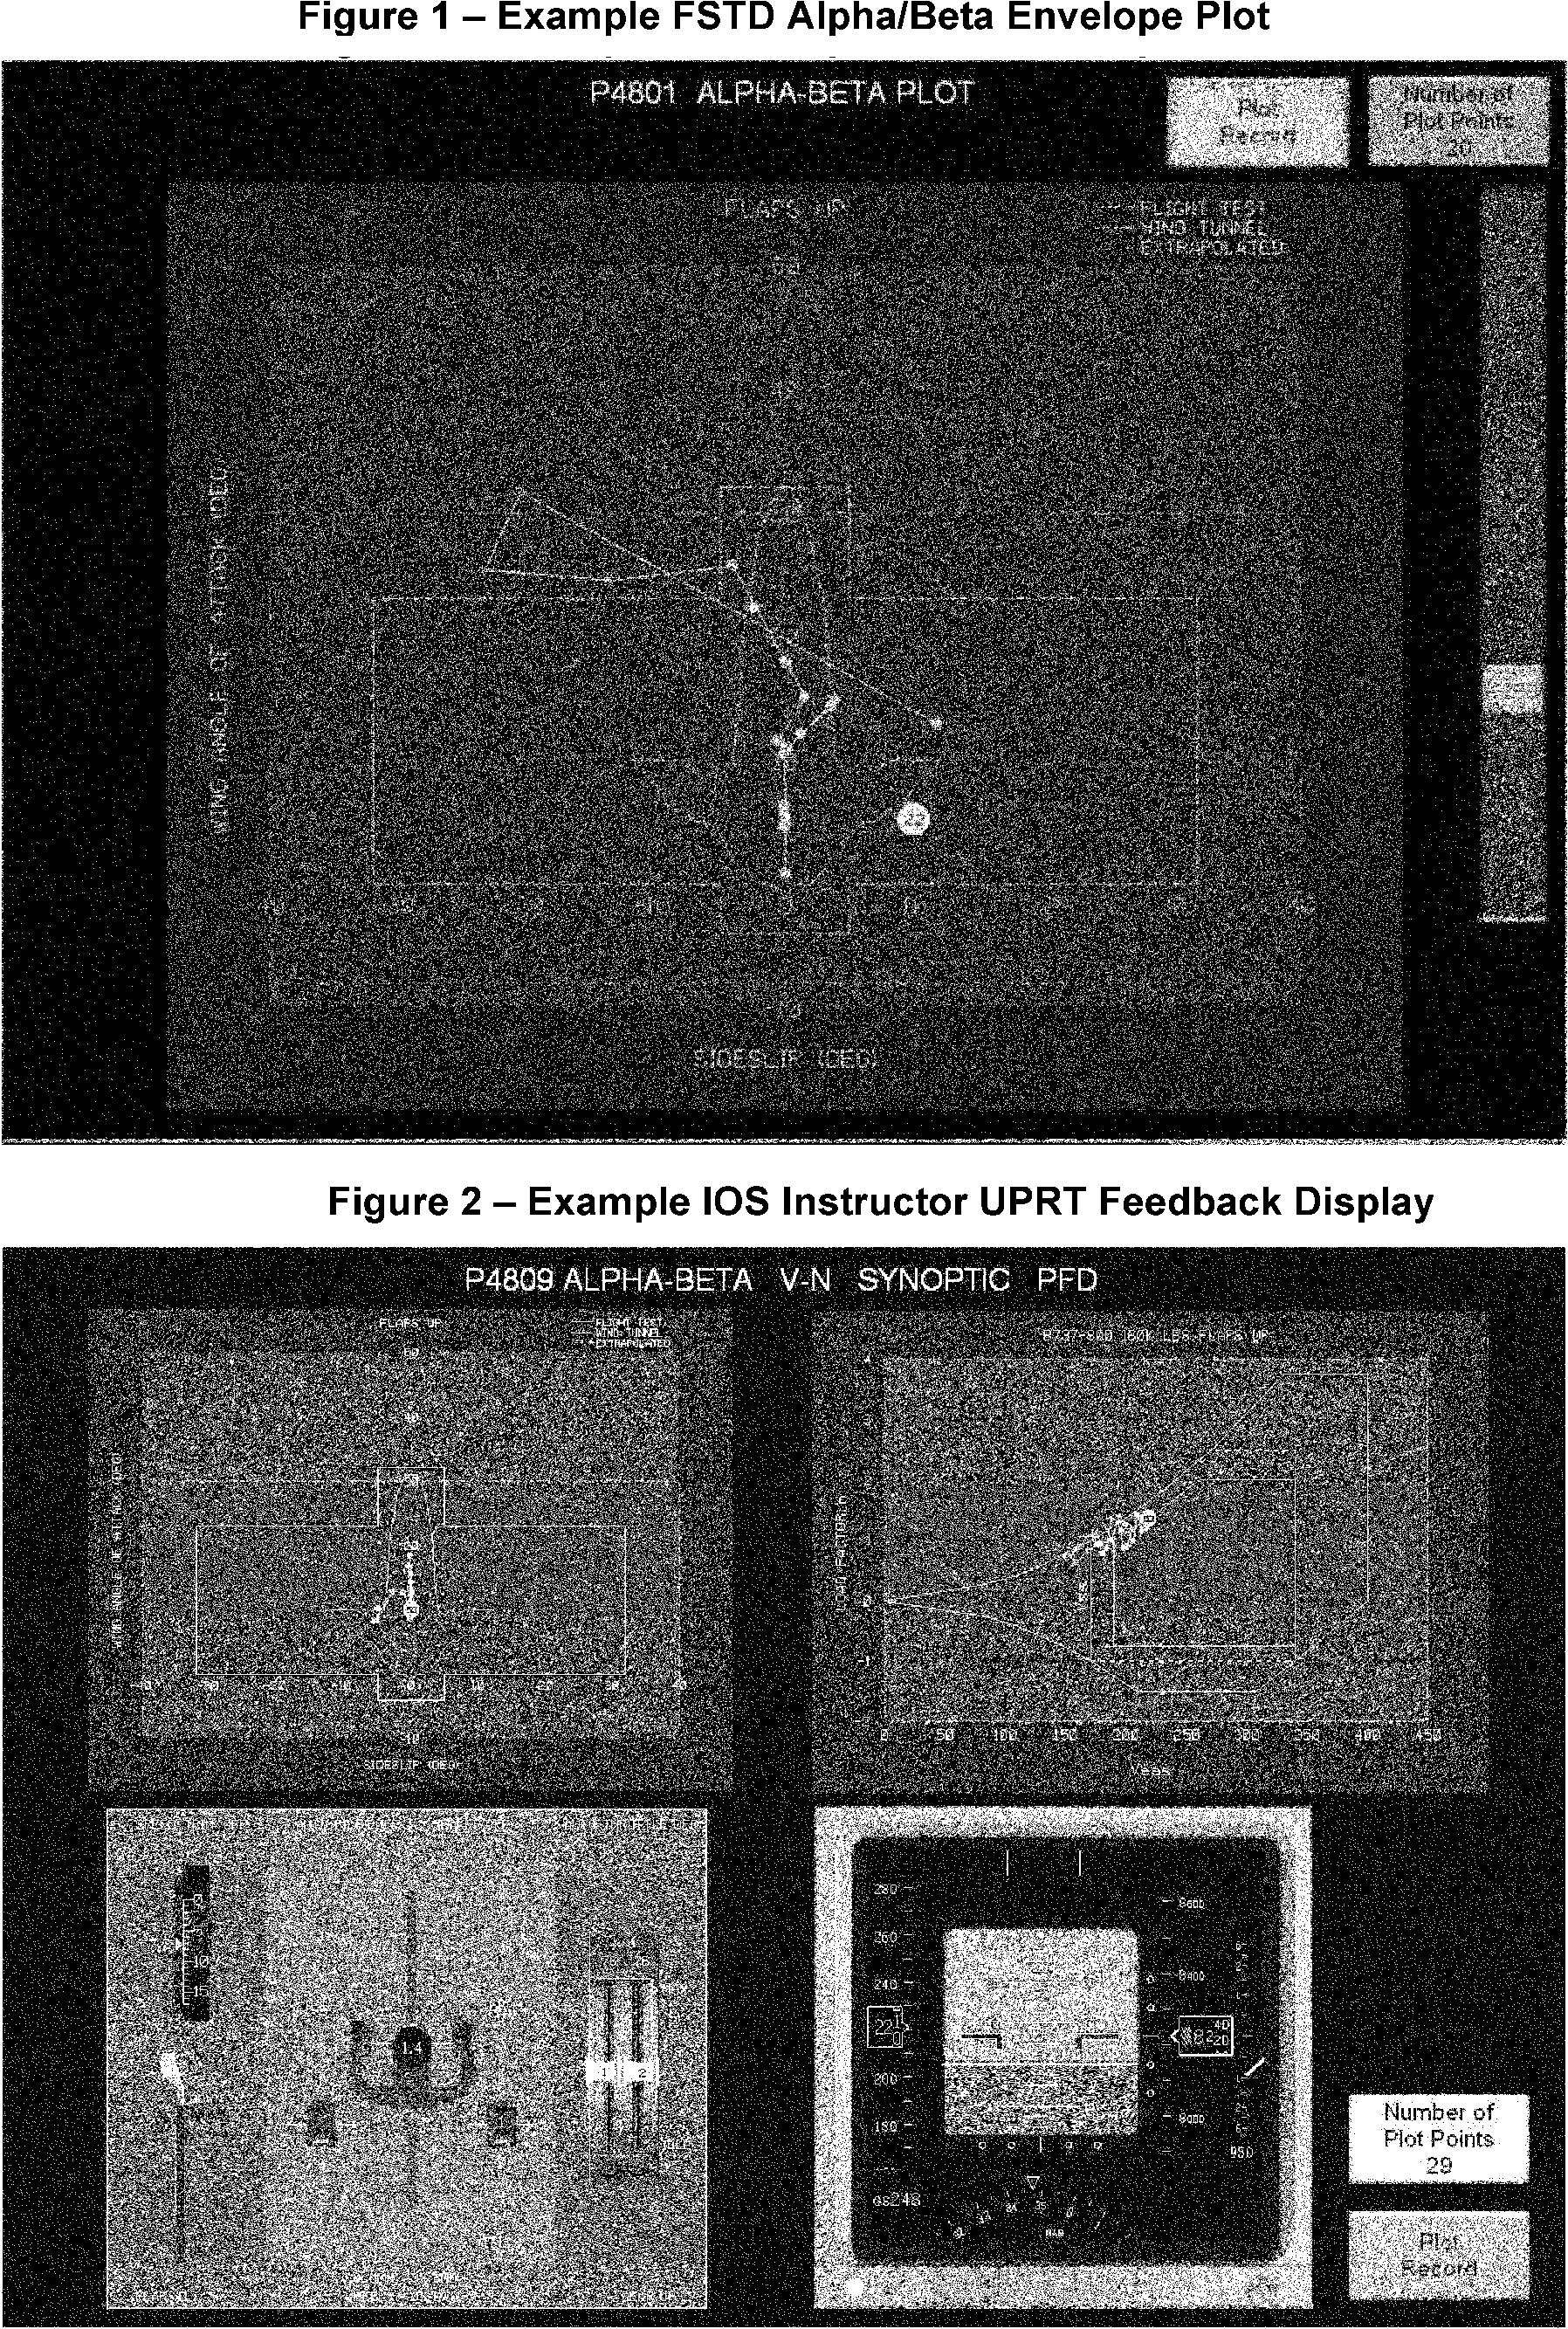 Graphic of An example FSTD “alpha/beta” envelope display and IOS feedback mechanism are shown below in Figure 1 and Figure 2. The following examples are provided as guidance material on one possible method to display the required UPRT feedback parameters on an IOS display. FSTD sponsors may develop other methods and feedback mechanisms that provide the required parameters and support the training program objectives.